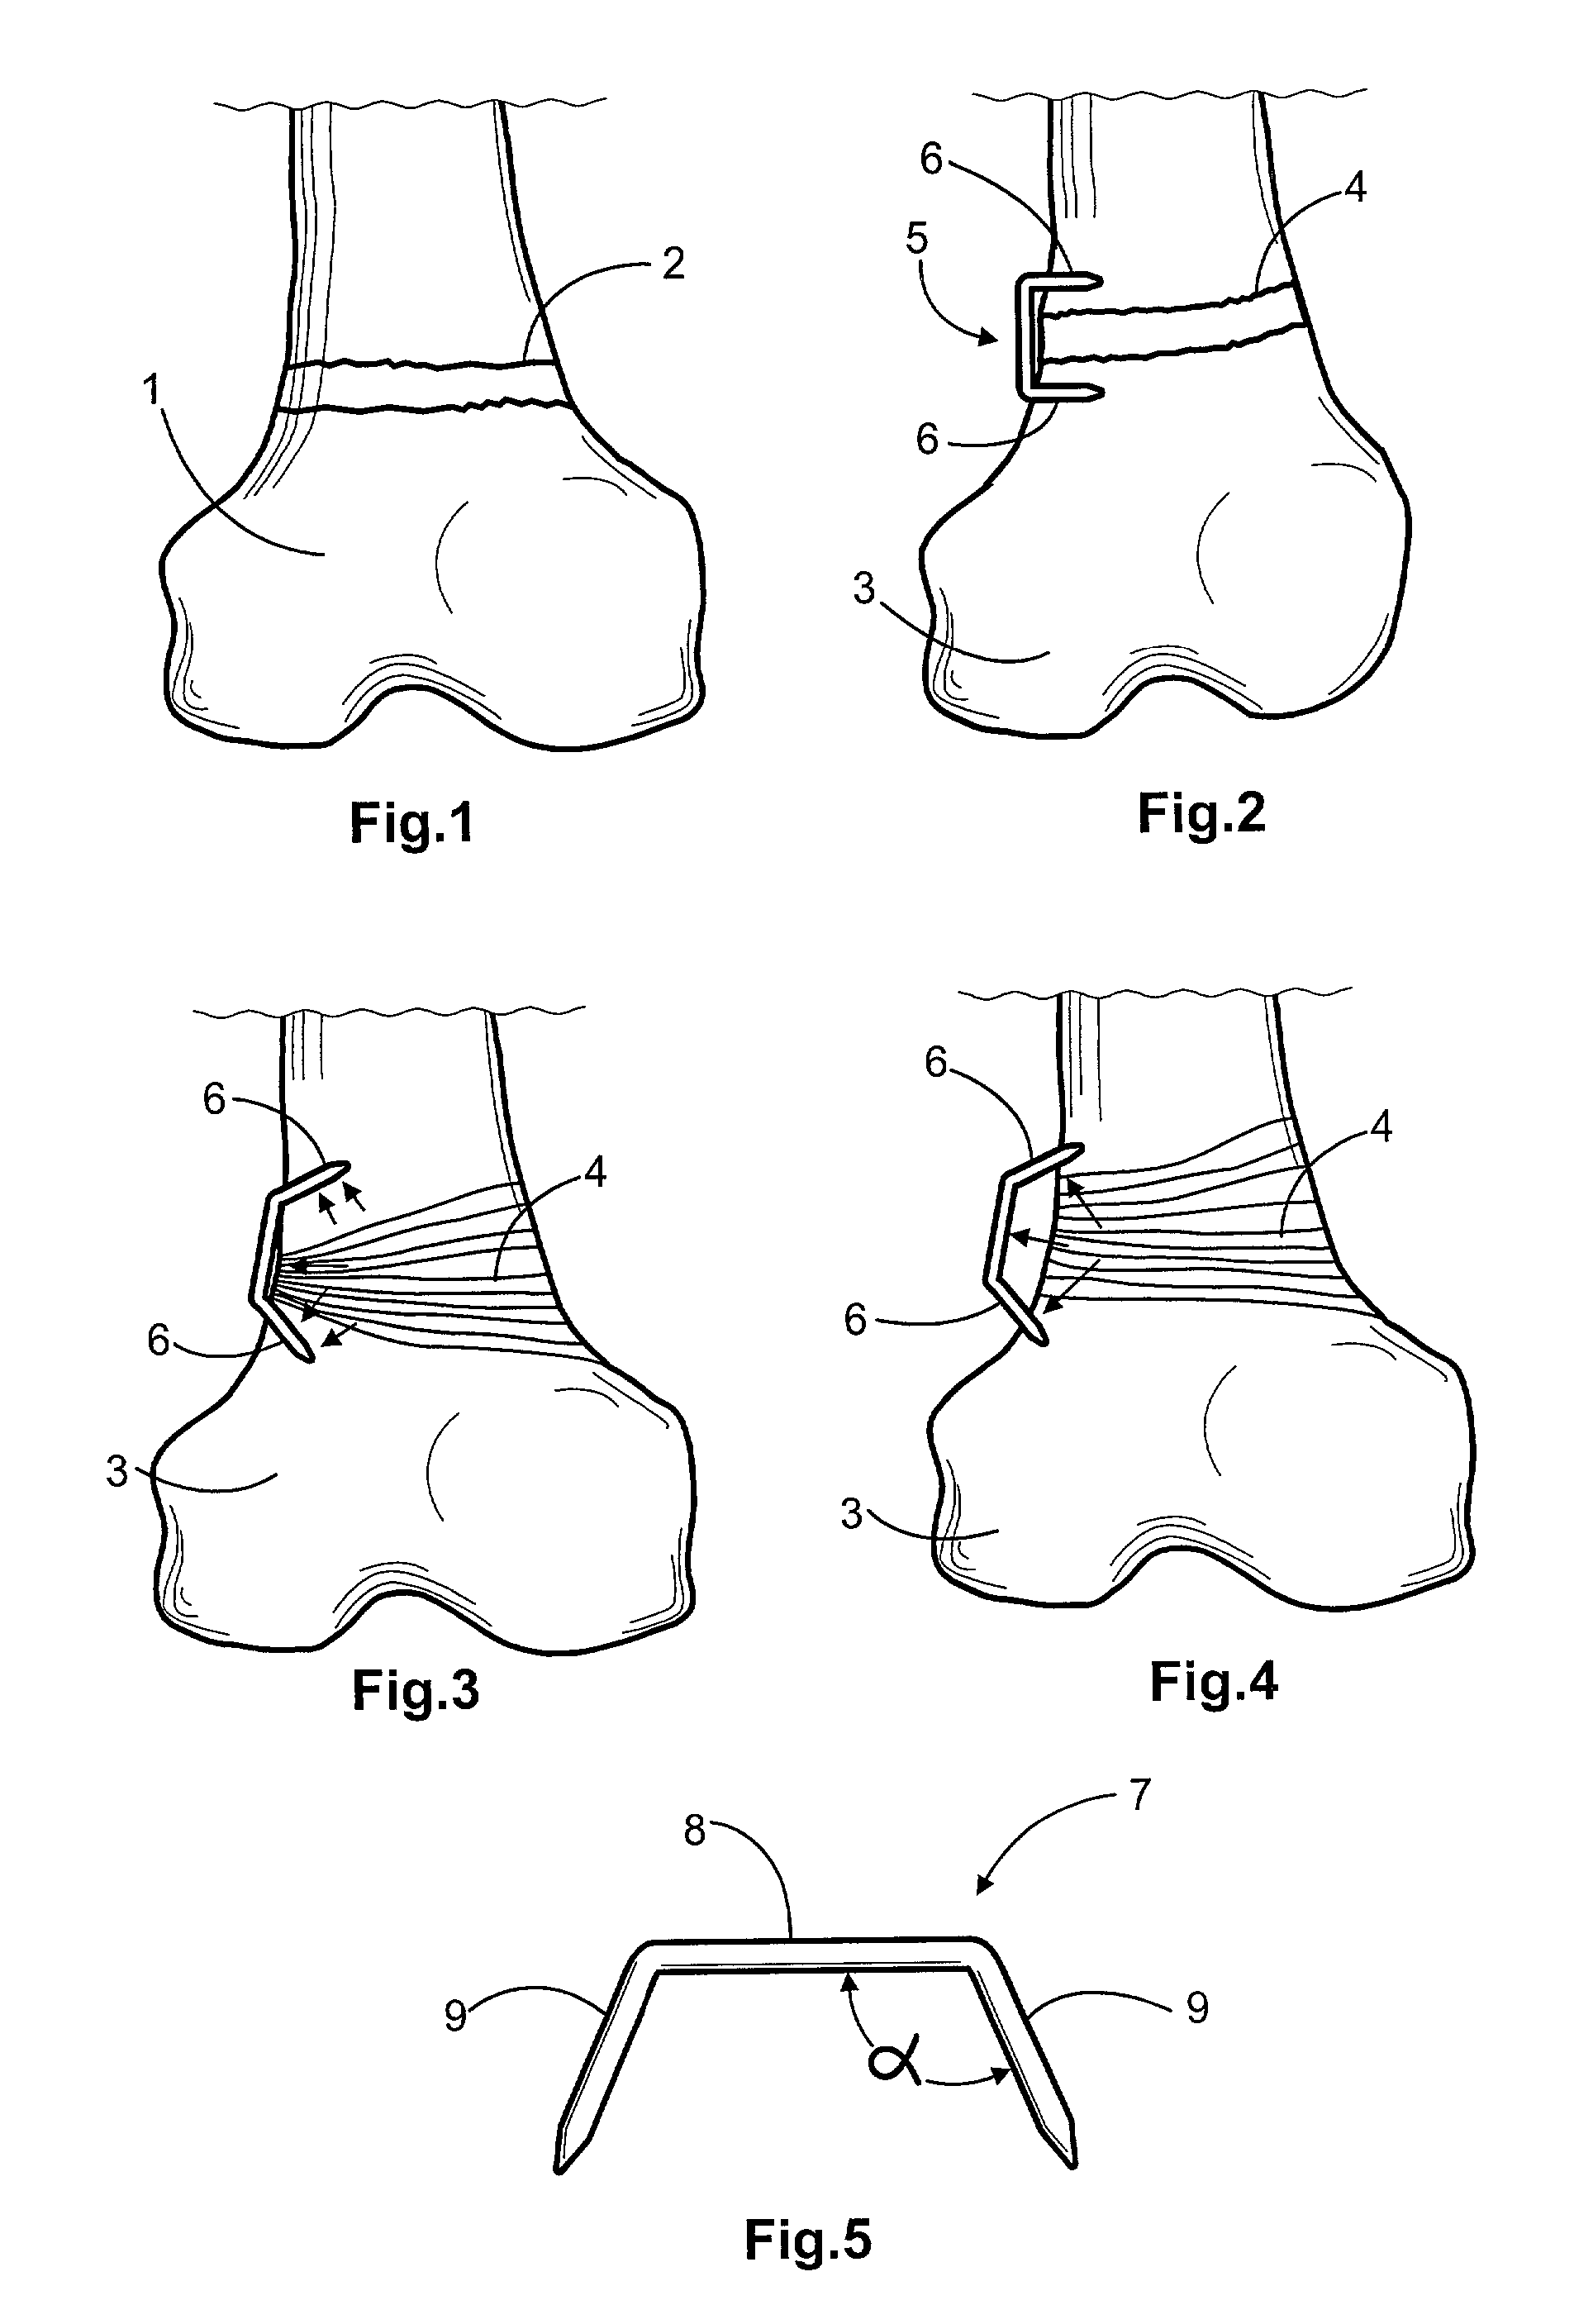 Bone staple and methods for correcting bone deficiencies by controllably suppressing and/or inducing the growth of the epiphyseal plate